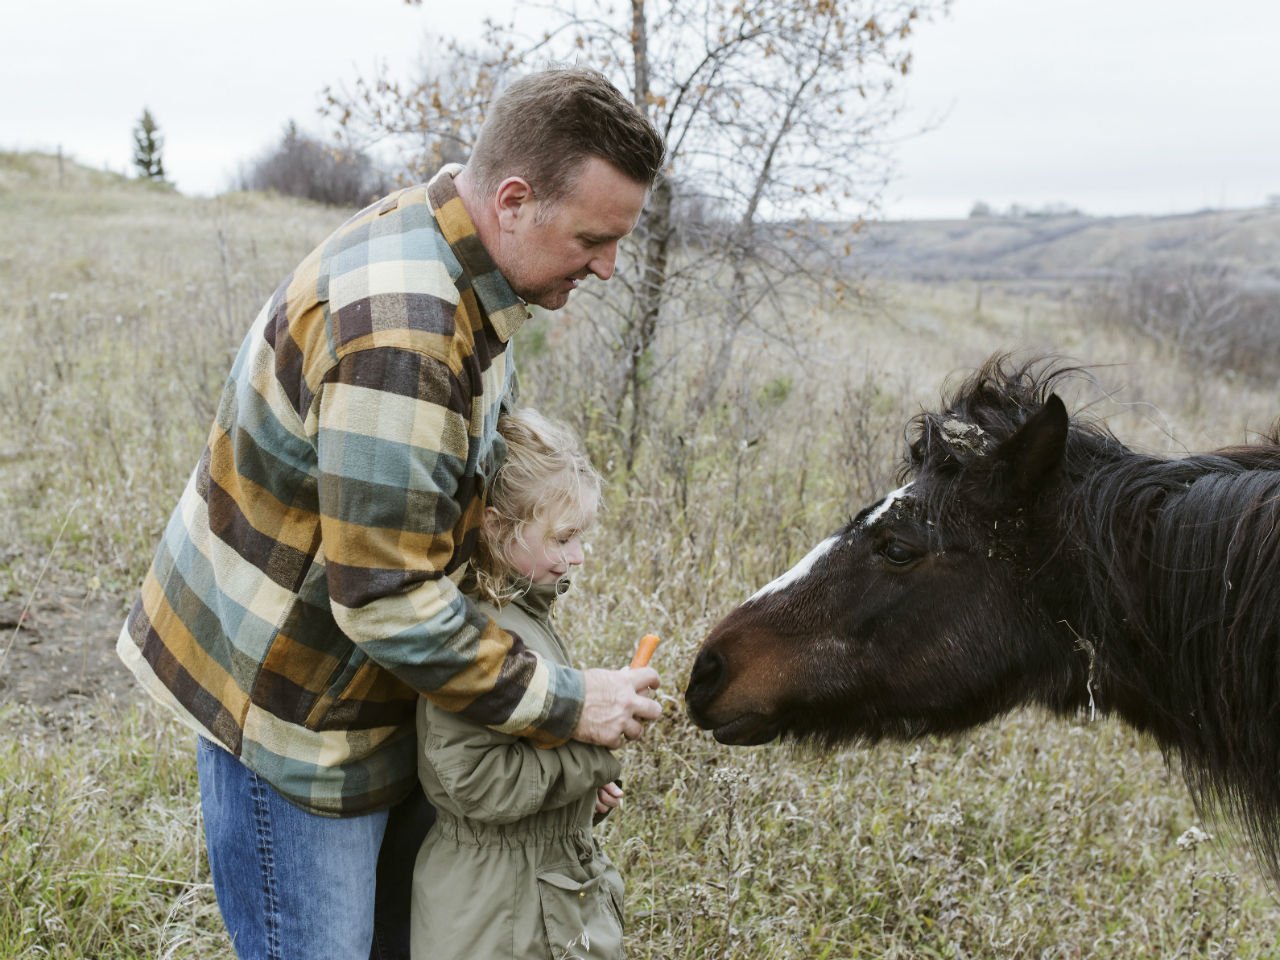 a little girl and her dad feed a pony a carrot